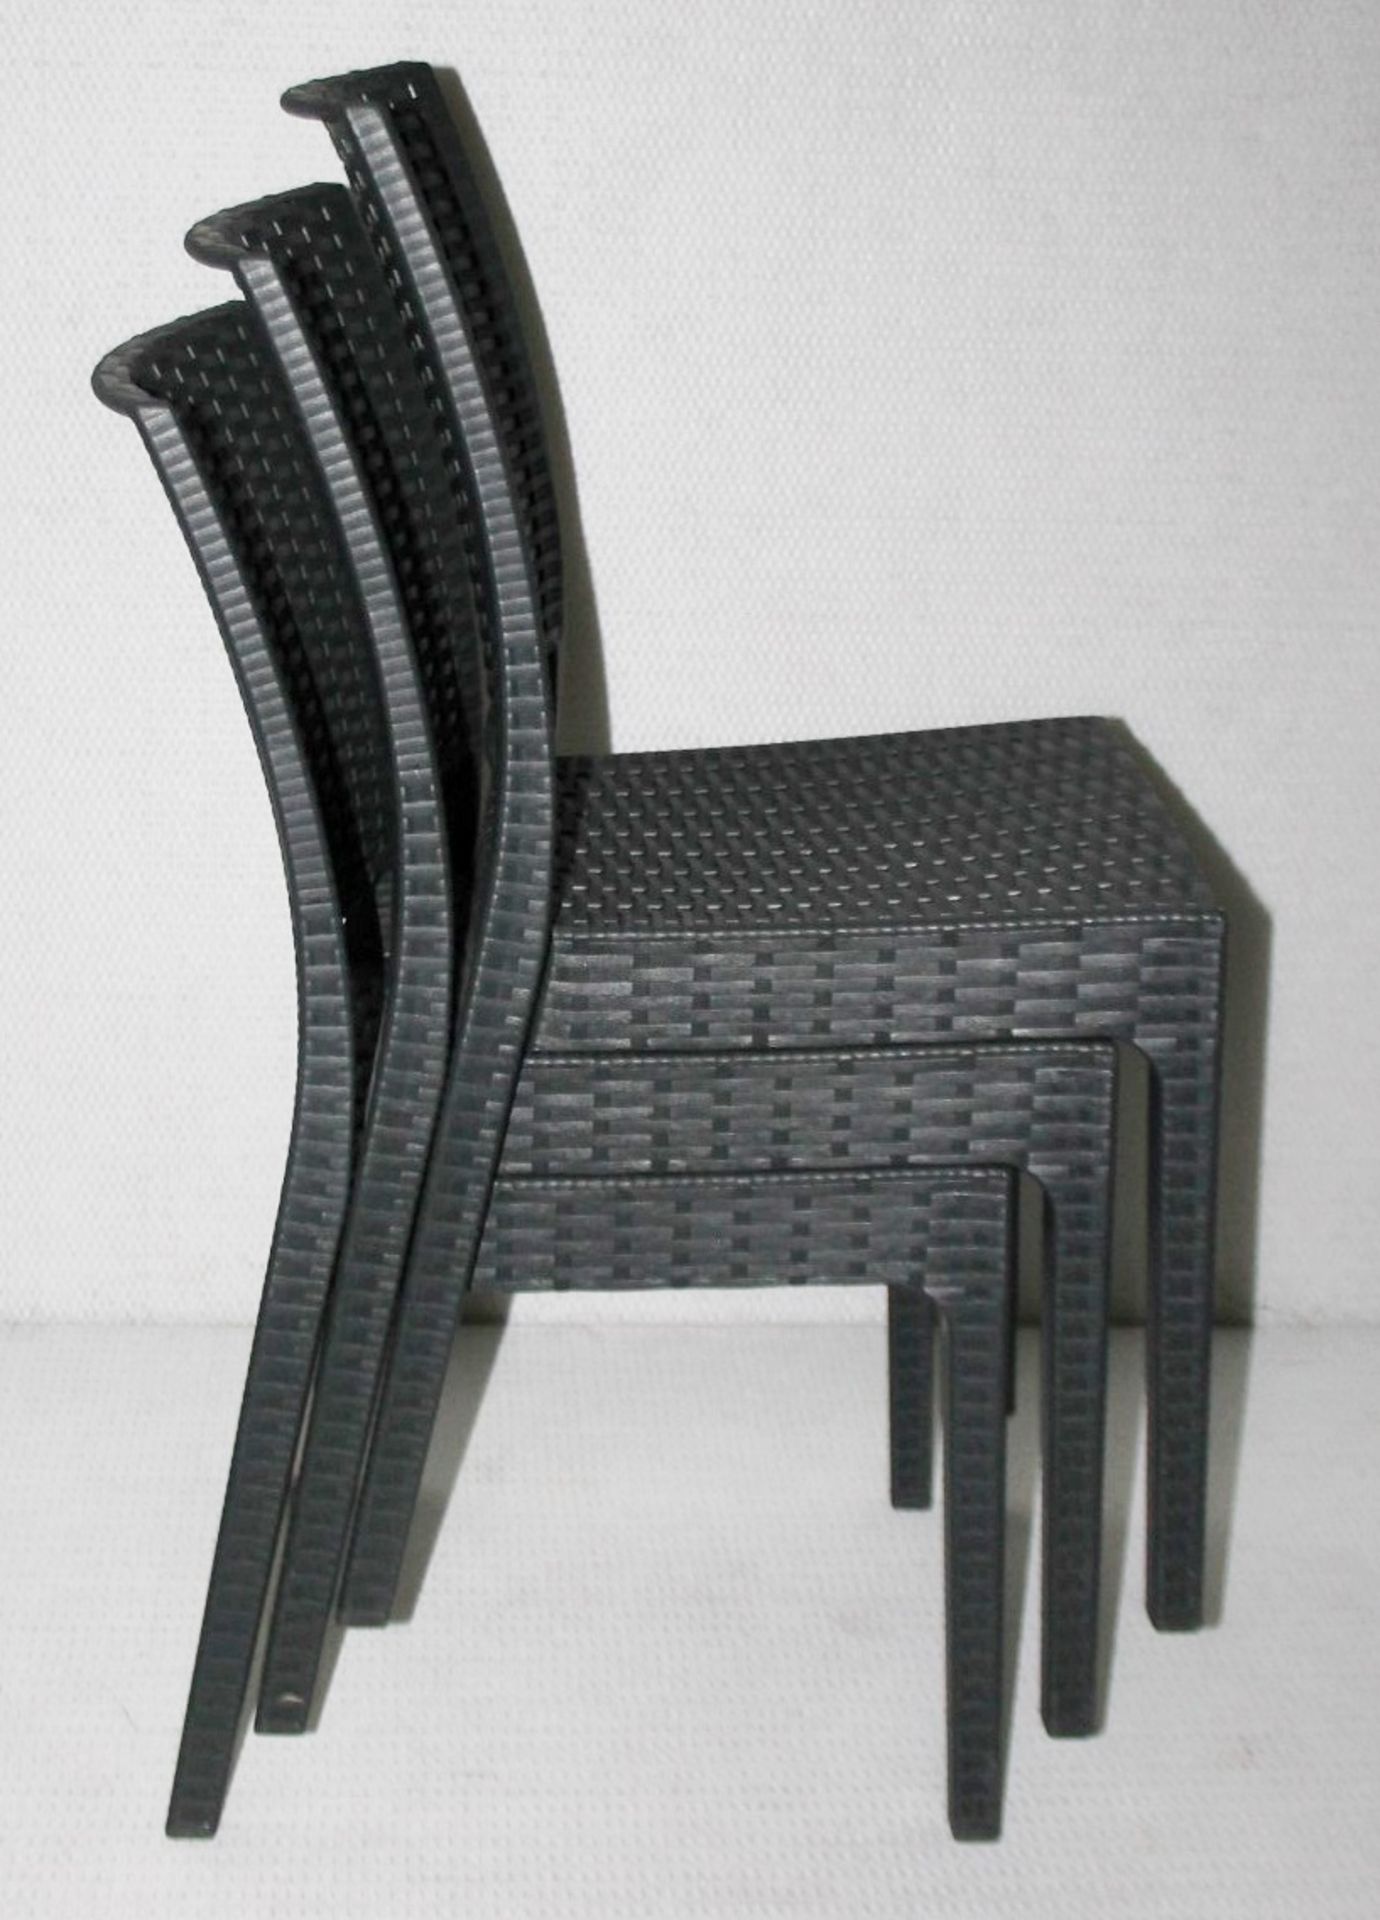 8 x SIESTA EXCLUSIVE 'Florida' Commercial Stackable Rattan-style Chairs In Dark Grey - Image 7 of 13